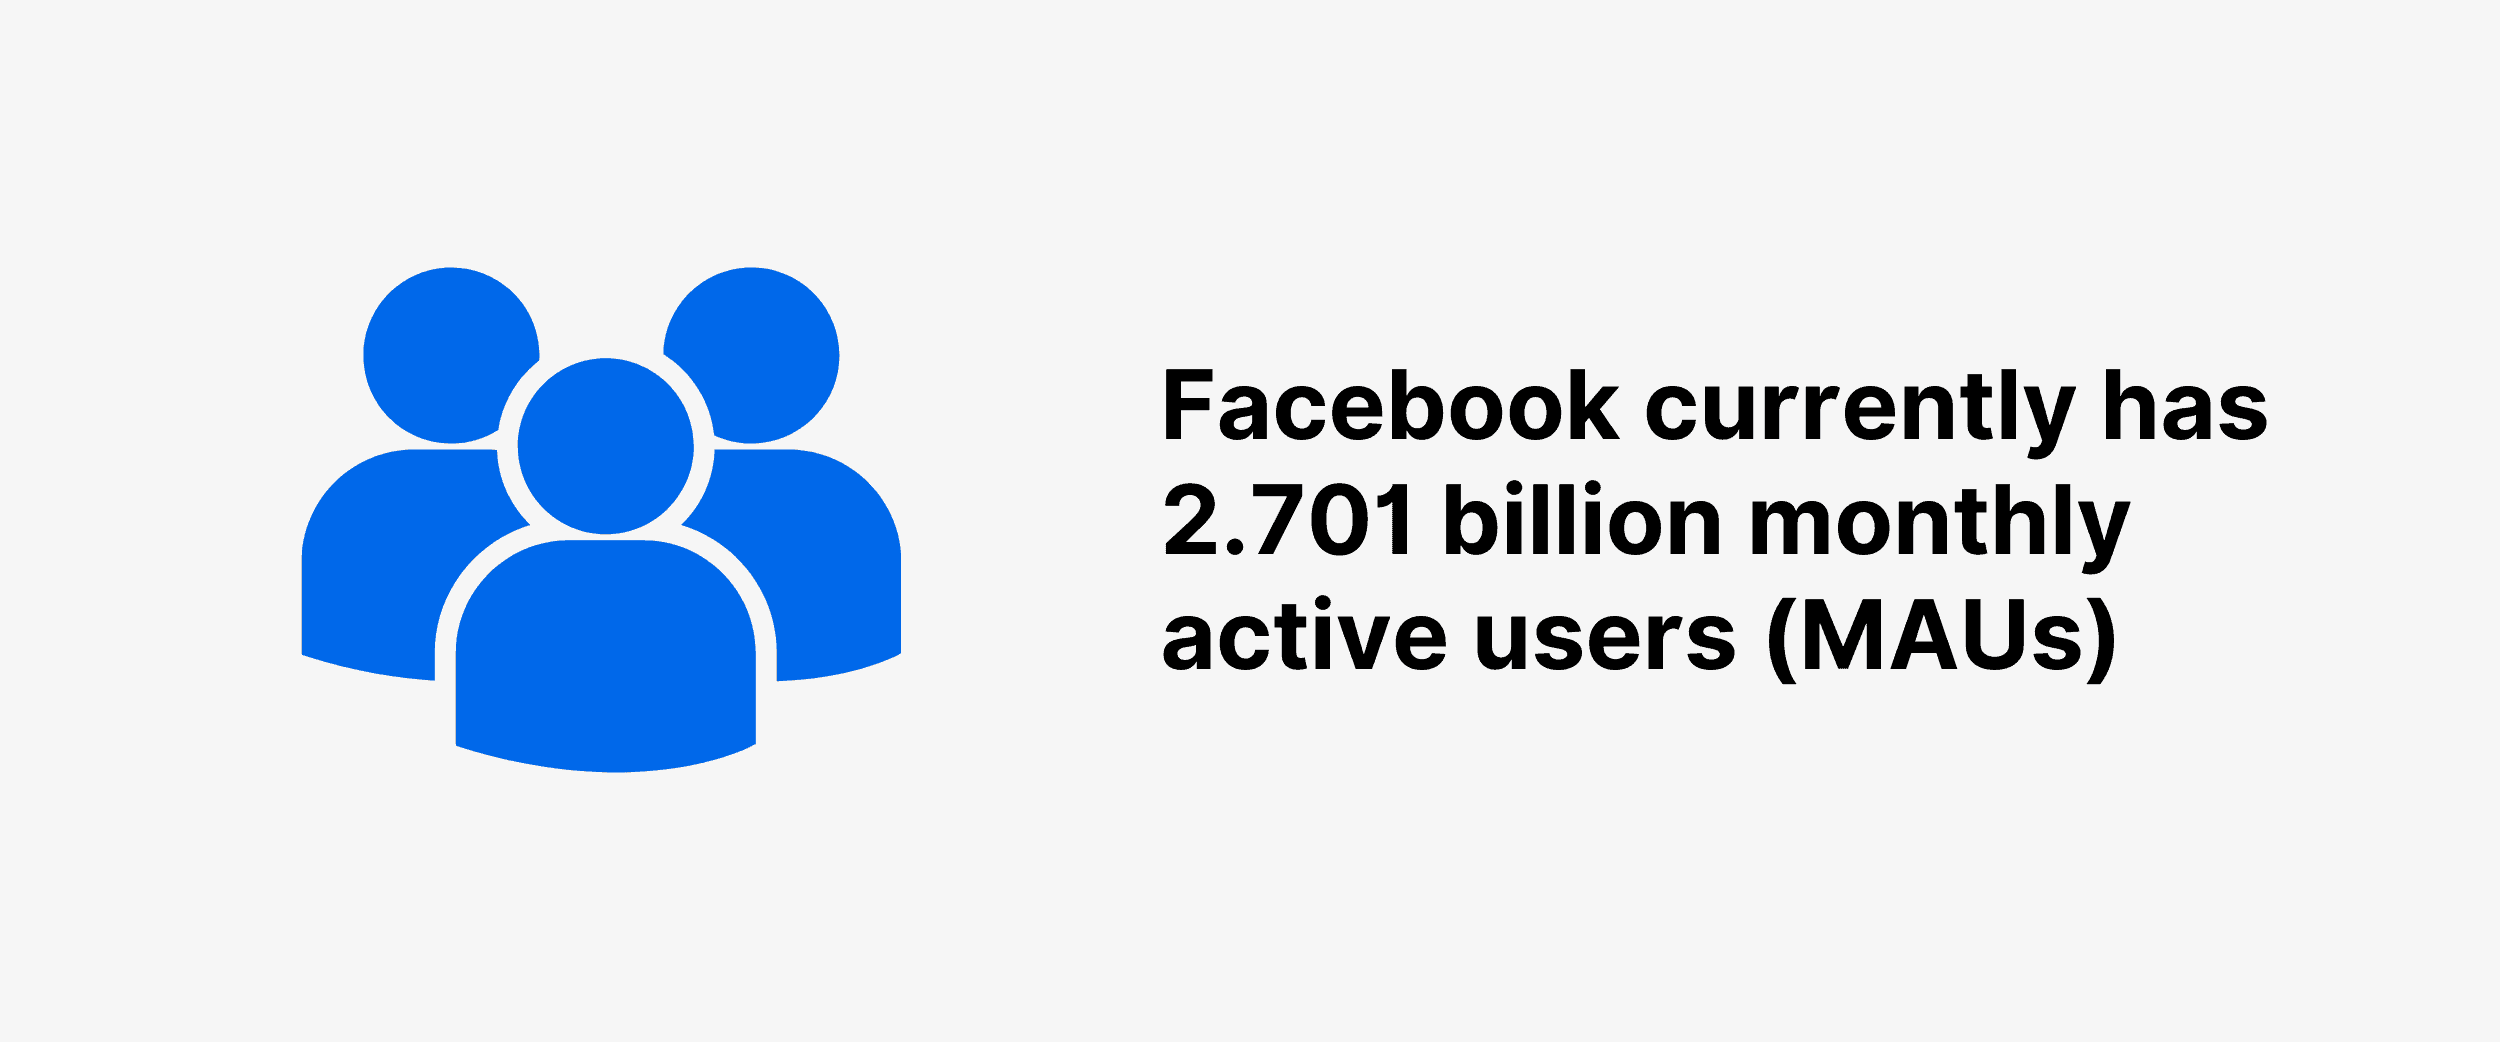 Facebook currently has 2.70 billion monthly active users